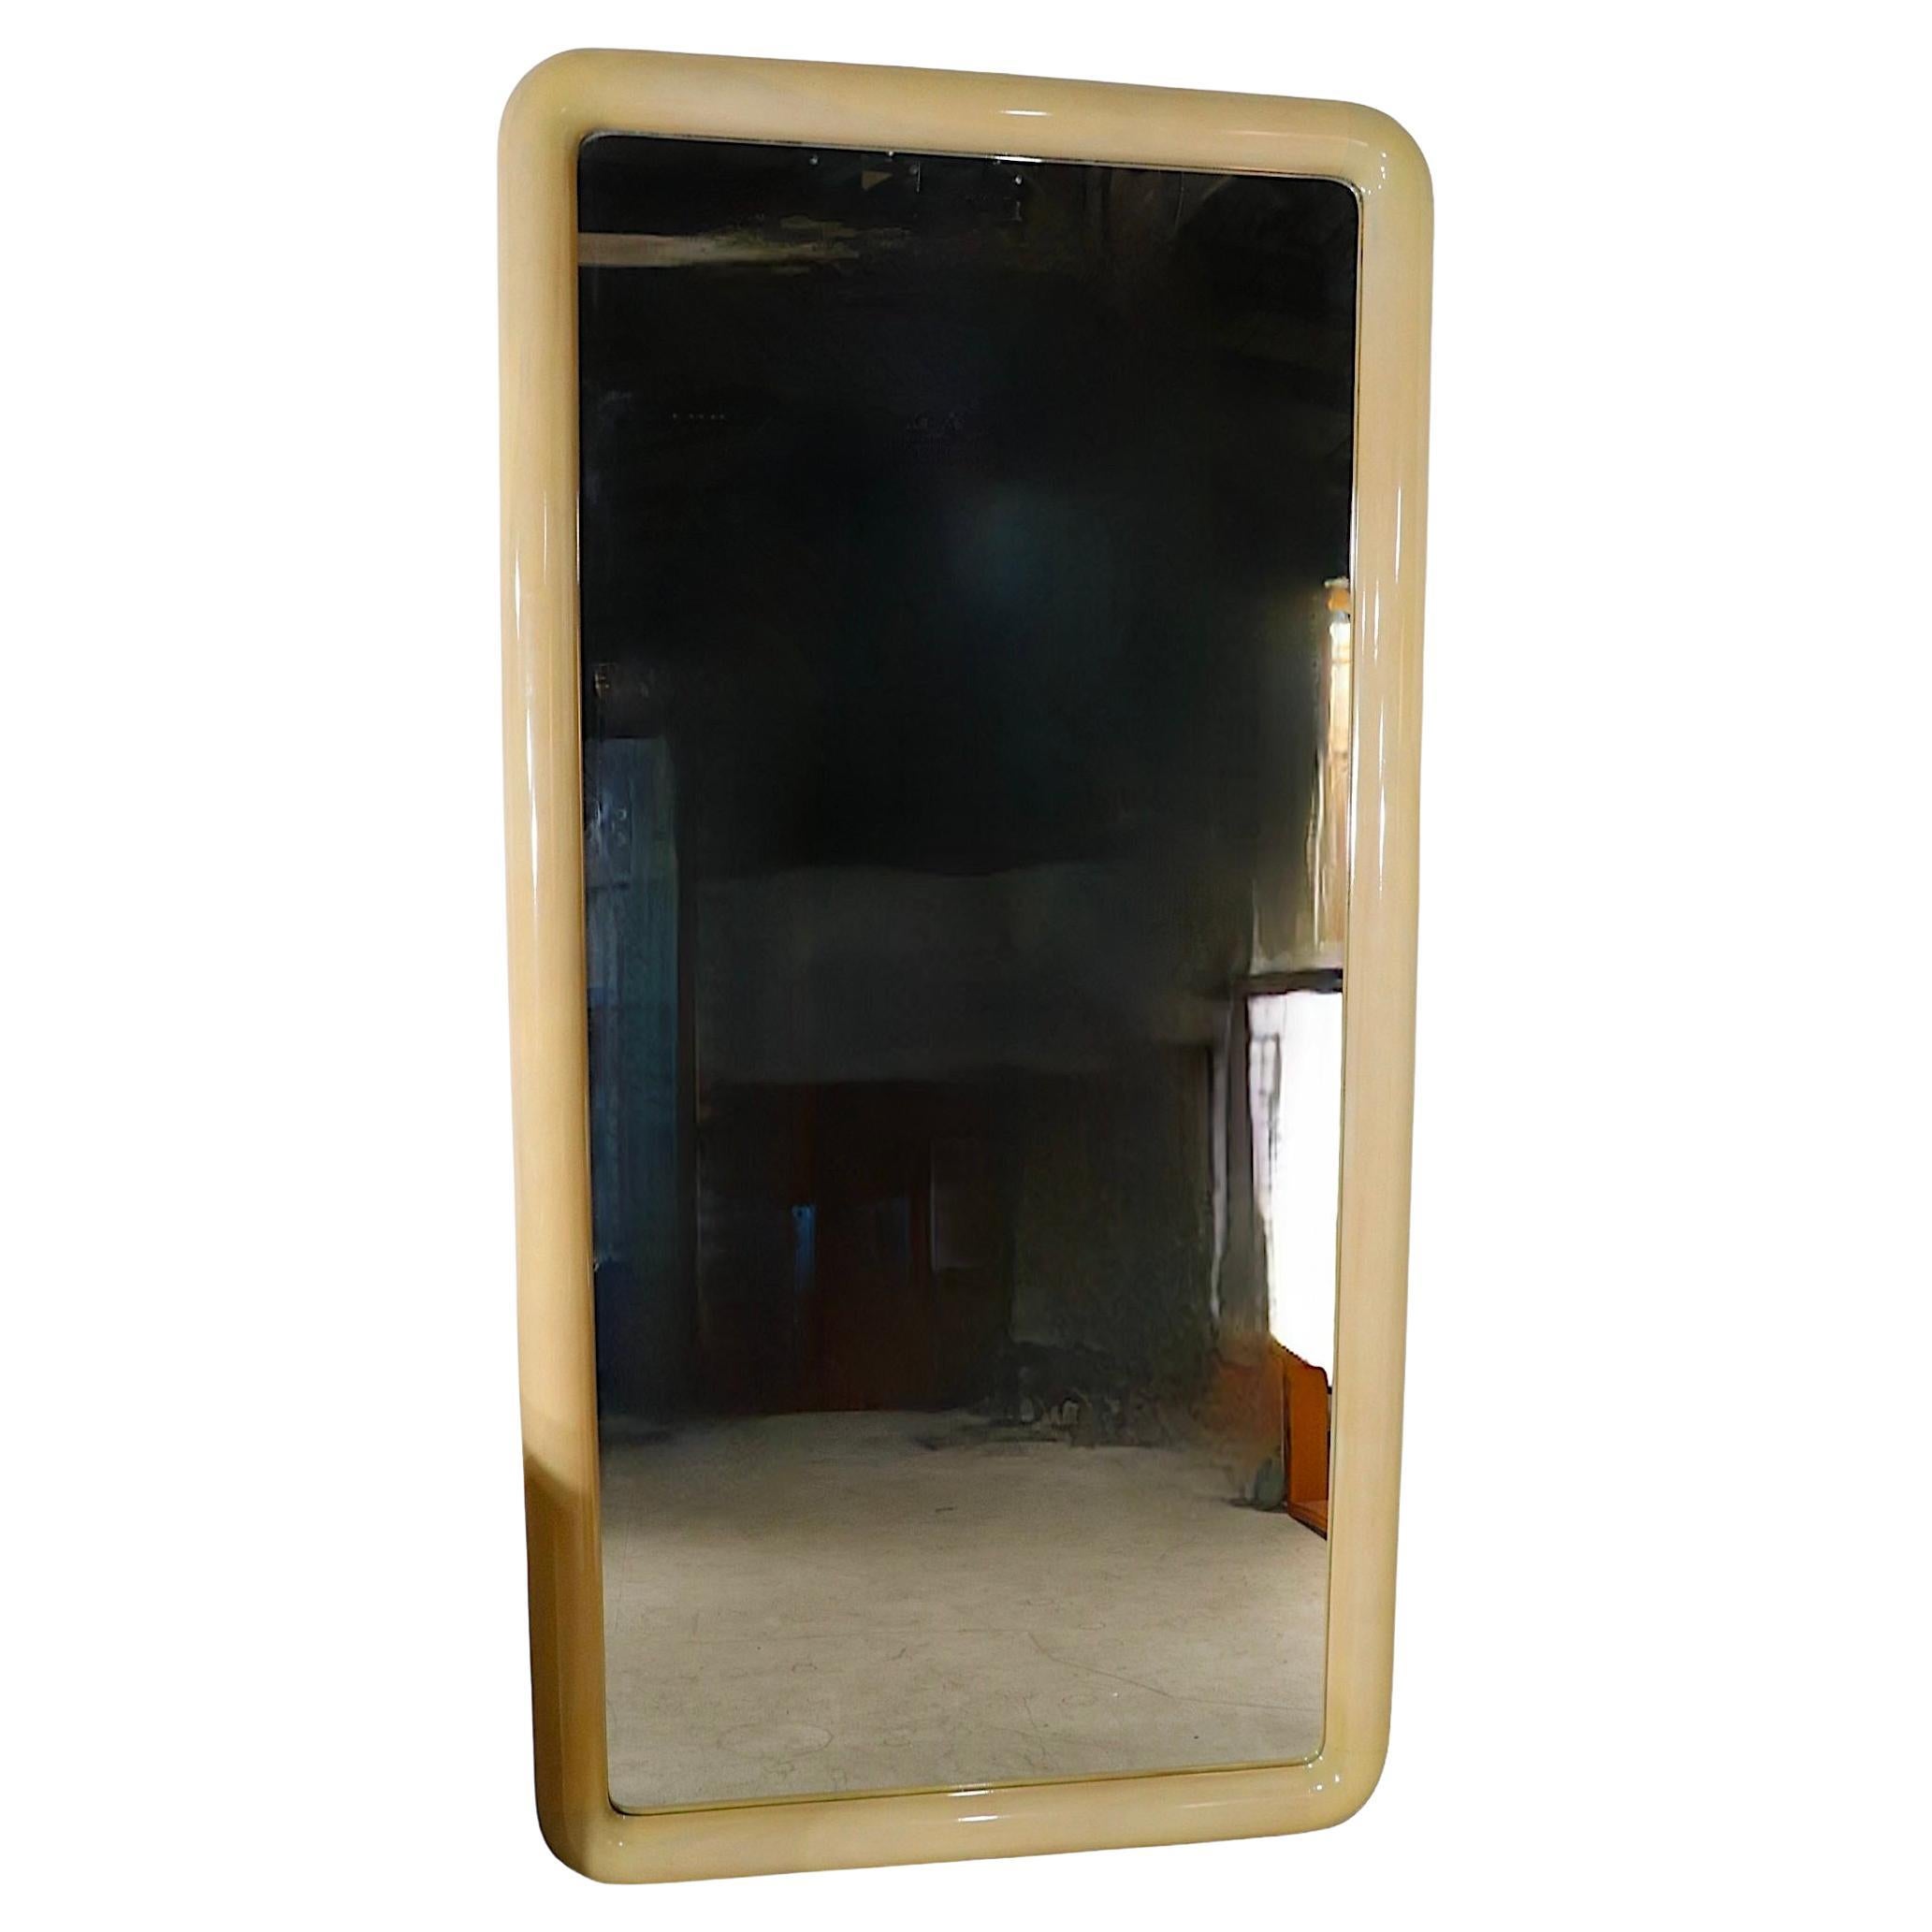 Fabulous oversized mirror by noted high end maker, Marcus & Jonson. The mirror features a lacquered parchment frame, and plate glass mirror. This spectacular mirror is in excellent, original condition, clean and ready to install. It is currently